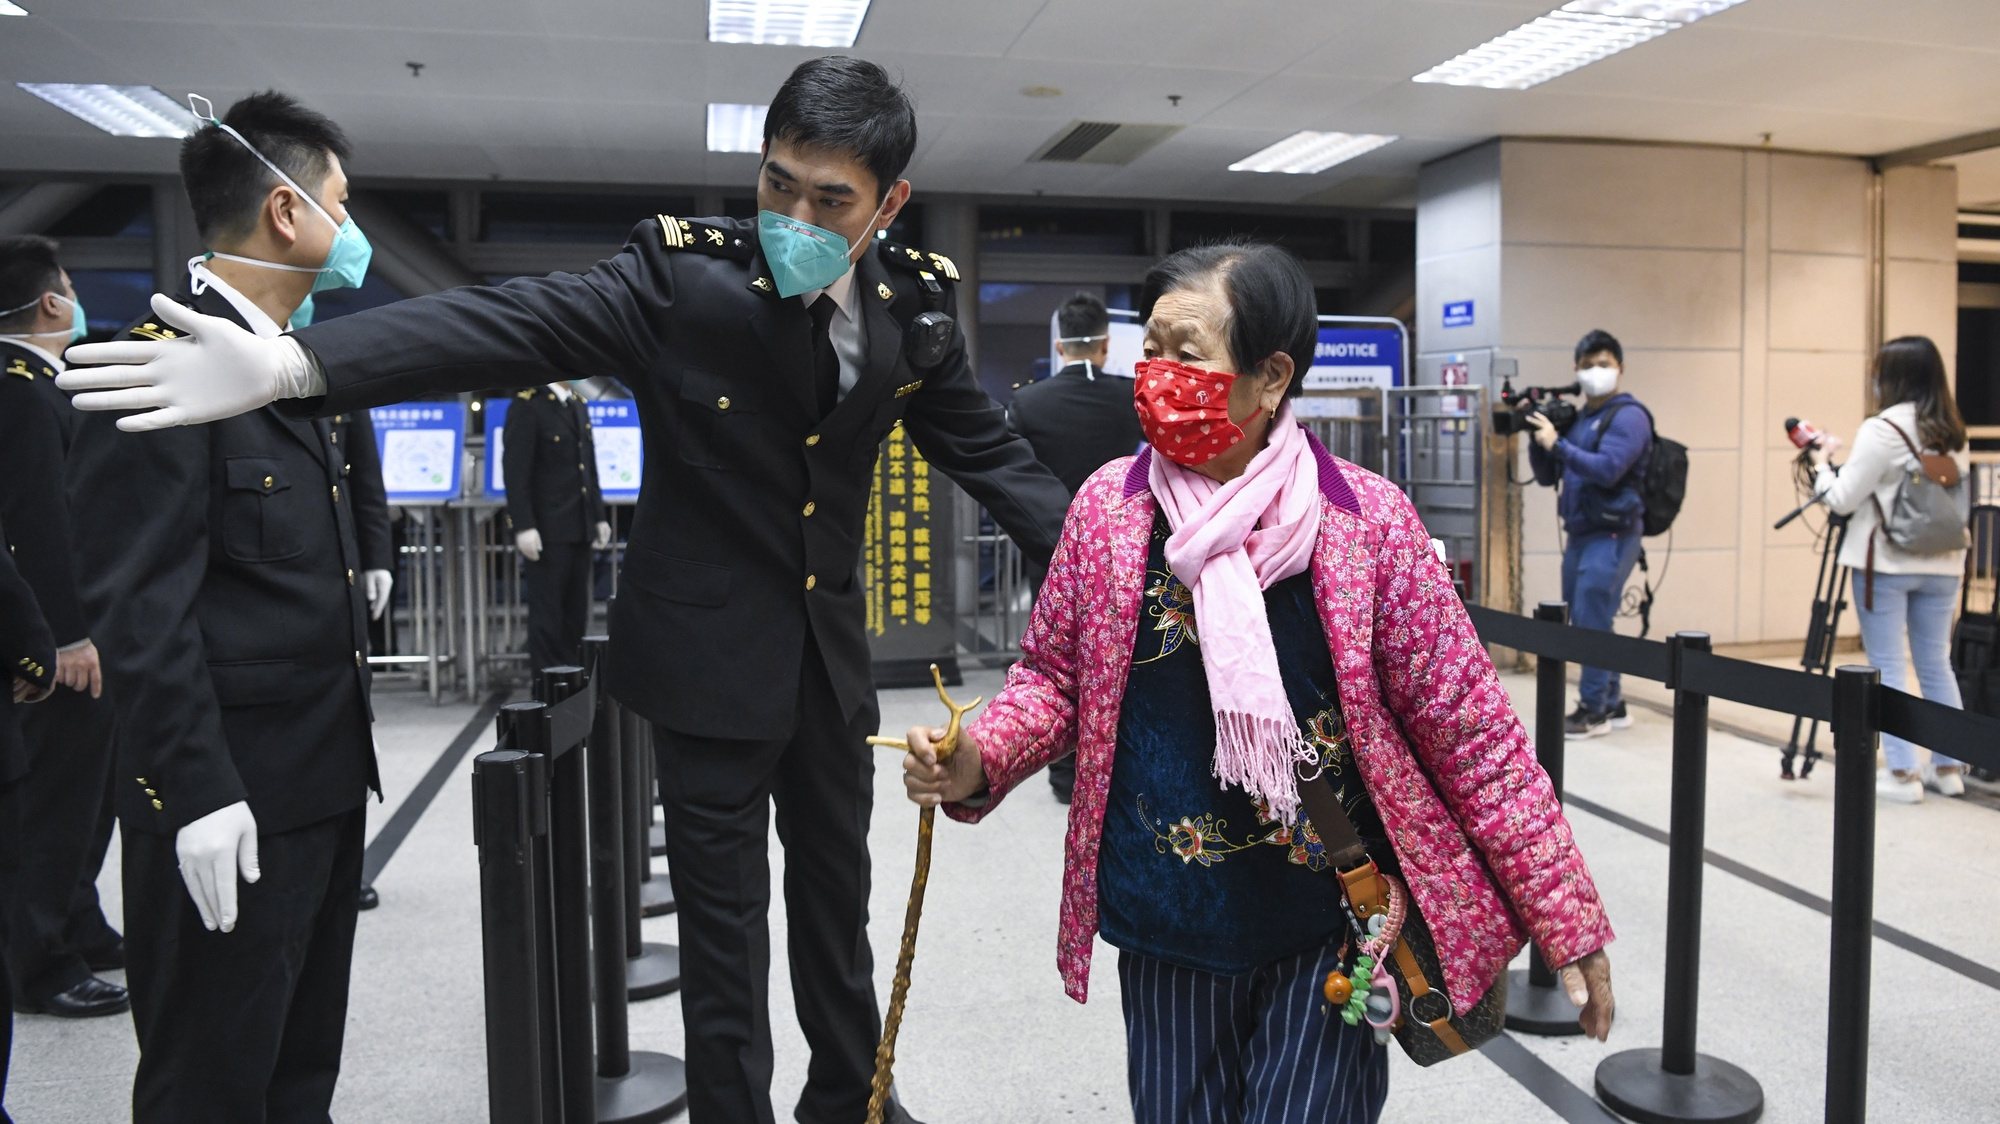 epa10451181 A customs officer guides a passenger arriving in Shenzhen from Hong Kong at the Lo Wu Control Point in Shenzhen, Guangdong Province, China, 06 February 2023. The Chinese mainland fully resumed normal travel with the Hong Kong and Macao special administrative regions (SARs) starting 06 February, in what is expected to be a strong boost for the two regions&#039; economic development. Starting 06 February, the Lo Wu Control Point, the Lok Ma Chau/Huanggang Control Point and the Heung Yuen Wai/Liantang Control Point opened up, marking the full resumption of the functioning of all seven land boundary control points between Shenzhen and Hong Kong.  EPA/XINHUA / Liang Xu CHINA OUT / MANDATORY CREDIT  EDITORIAL USE ONLY